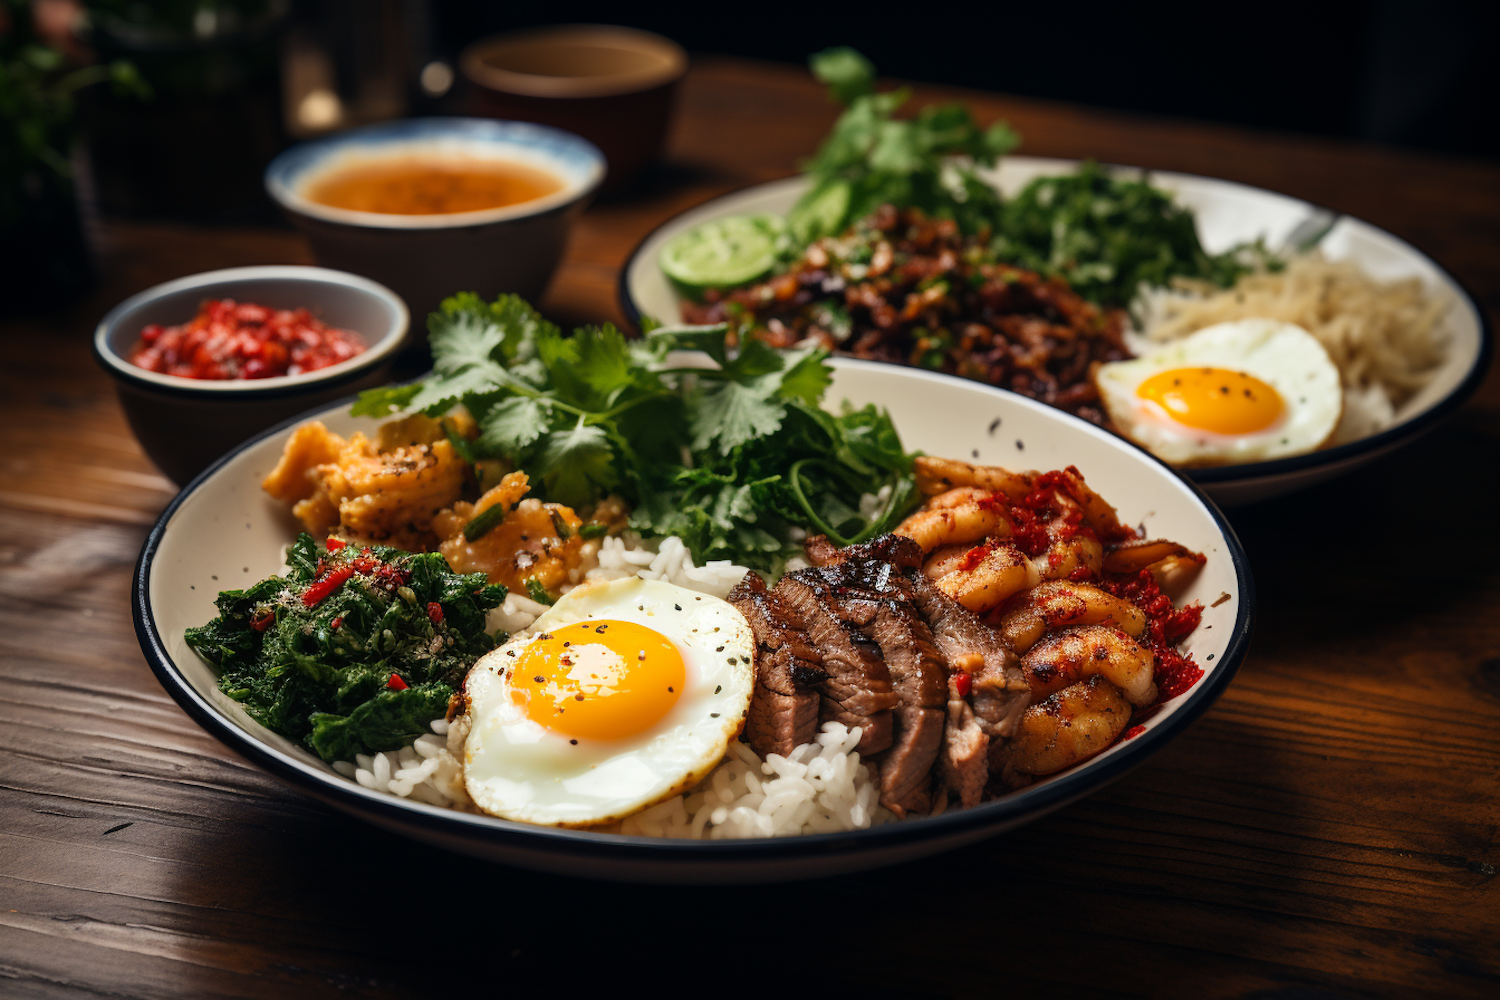 Colorful Fusion Feast with Sunny-Side-Up Egg and Grilled Meat